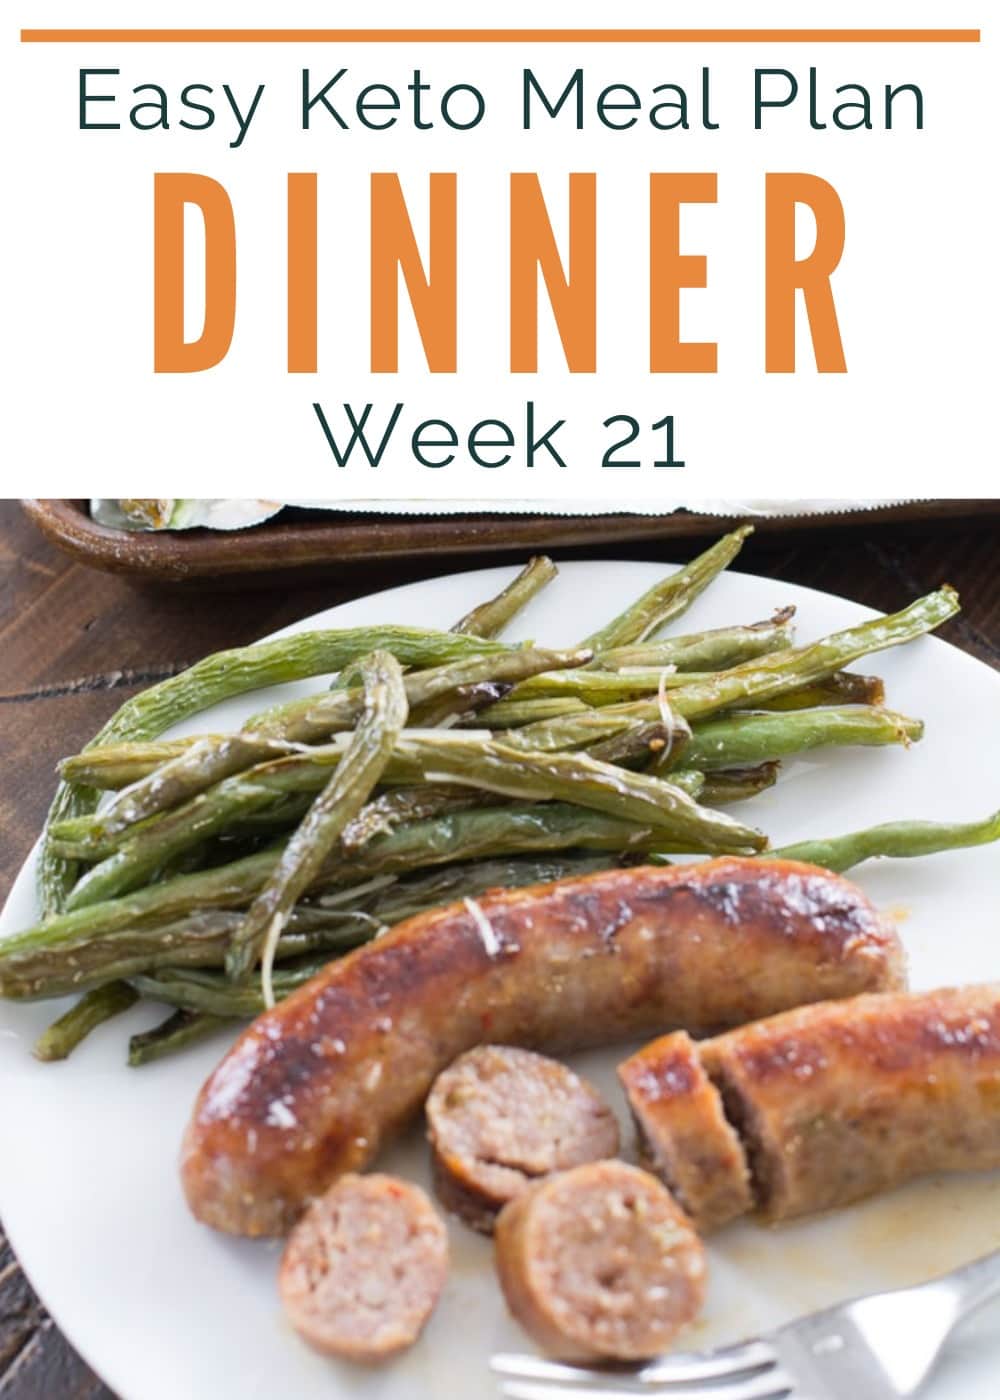 Week 21 of the Easy Keto Meal Plan features 5 keto dinners as well as an easy low-carb dessert AND a breakfast you can meal prep and share! Net carb counts, serving amounts, and printable shopping list are included.